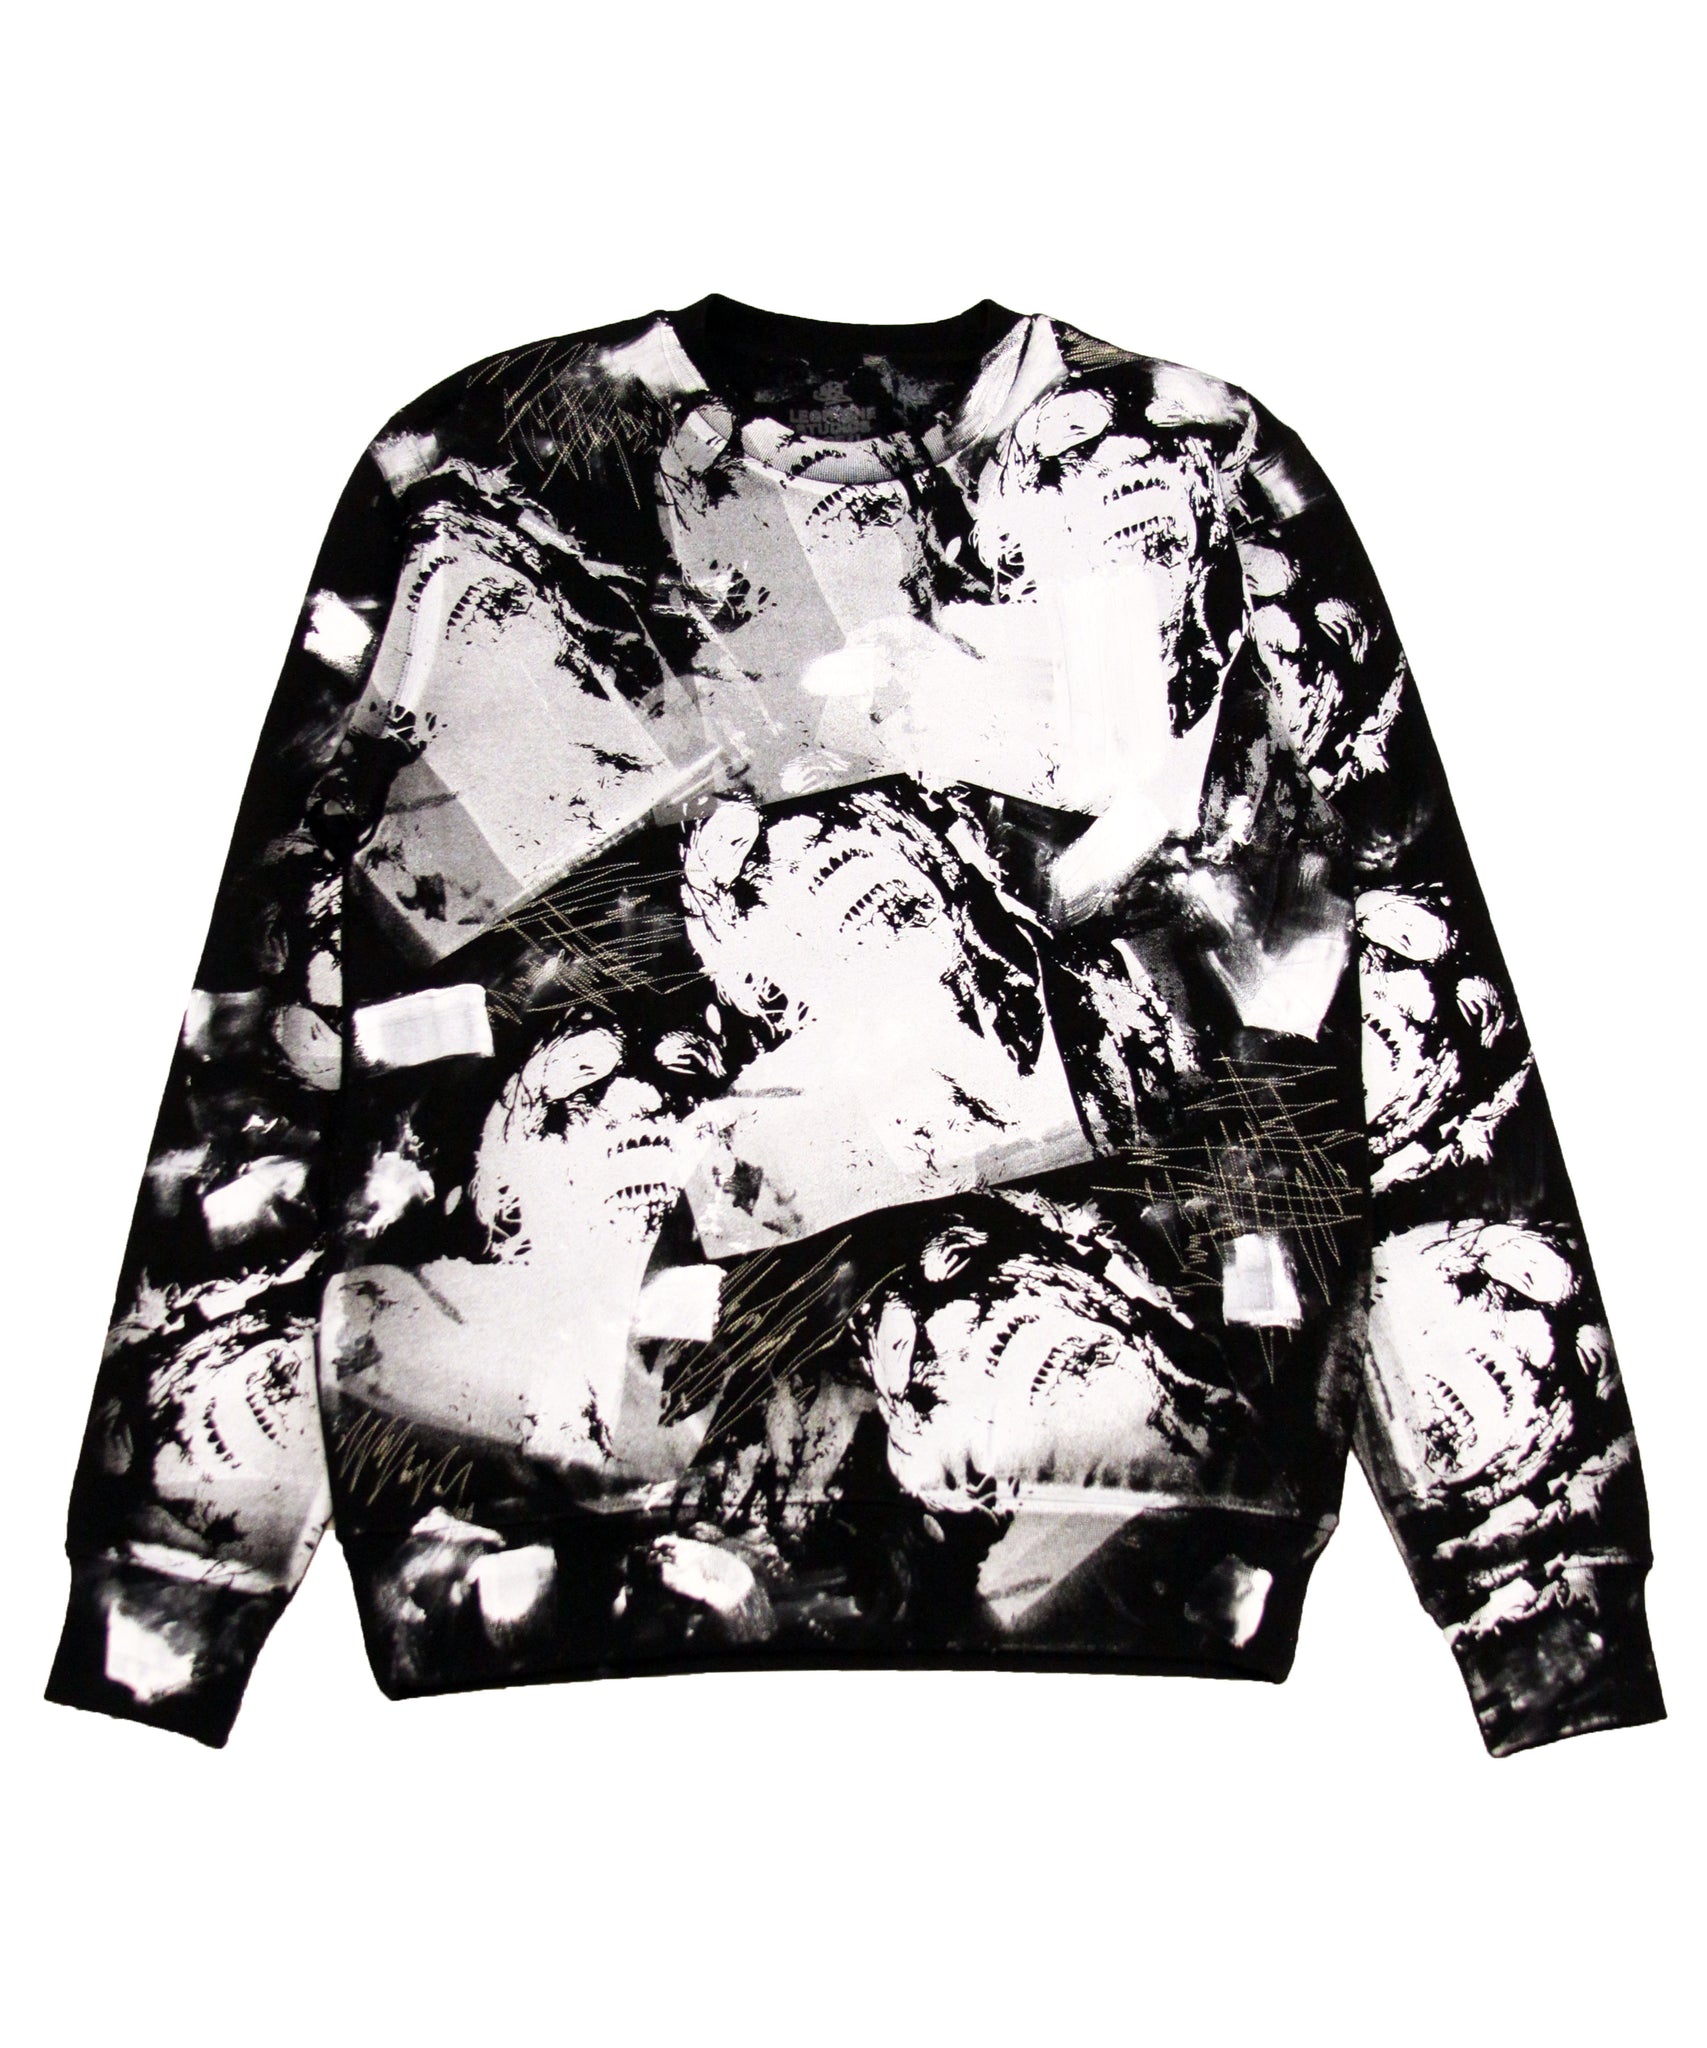 "INFECTED®" SERIES CREWNECK [EDITION 012]